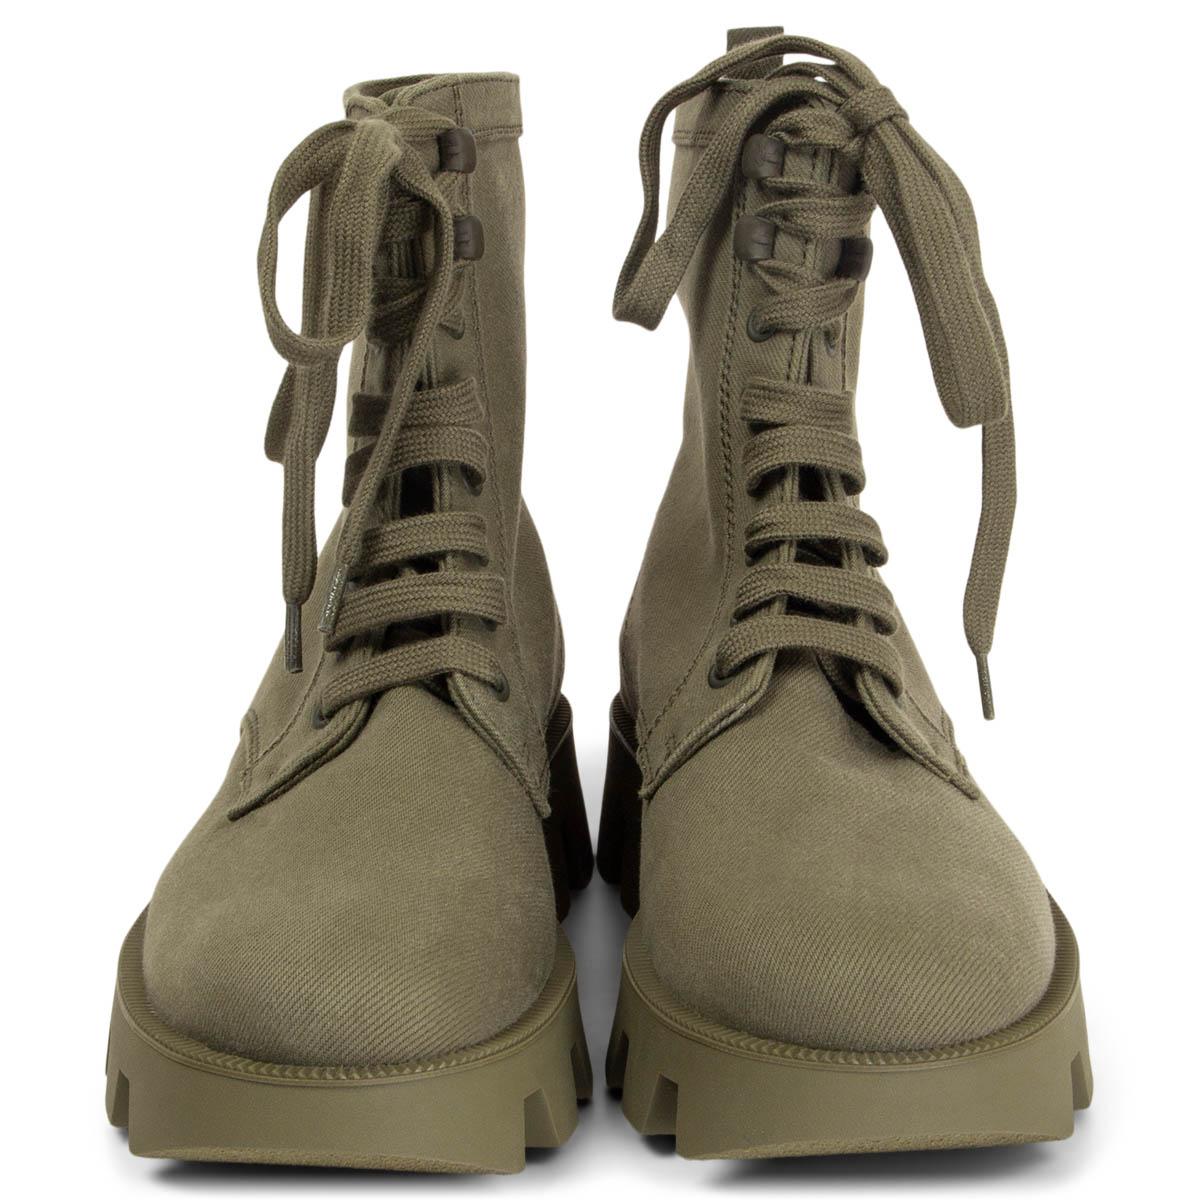 100% authentic Prada Combat ankle boots in military green canvas with tonal laces, practical pull tabs and oversized, grooved rubber soles. Brand new. 

Measurements
Imprinted Size	38.5
Shoe Size	38.5
Inside Sole	26.5cm (10.3in)
Width	8cm